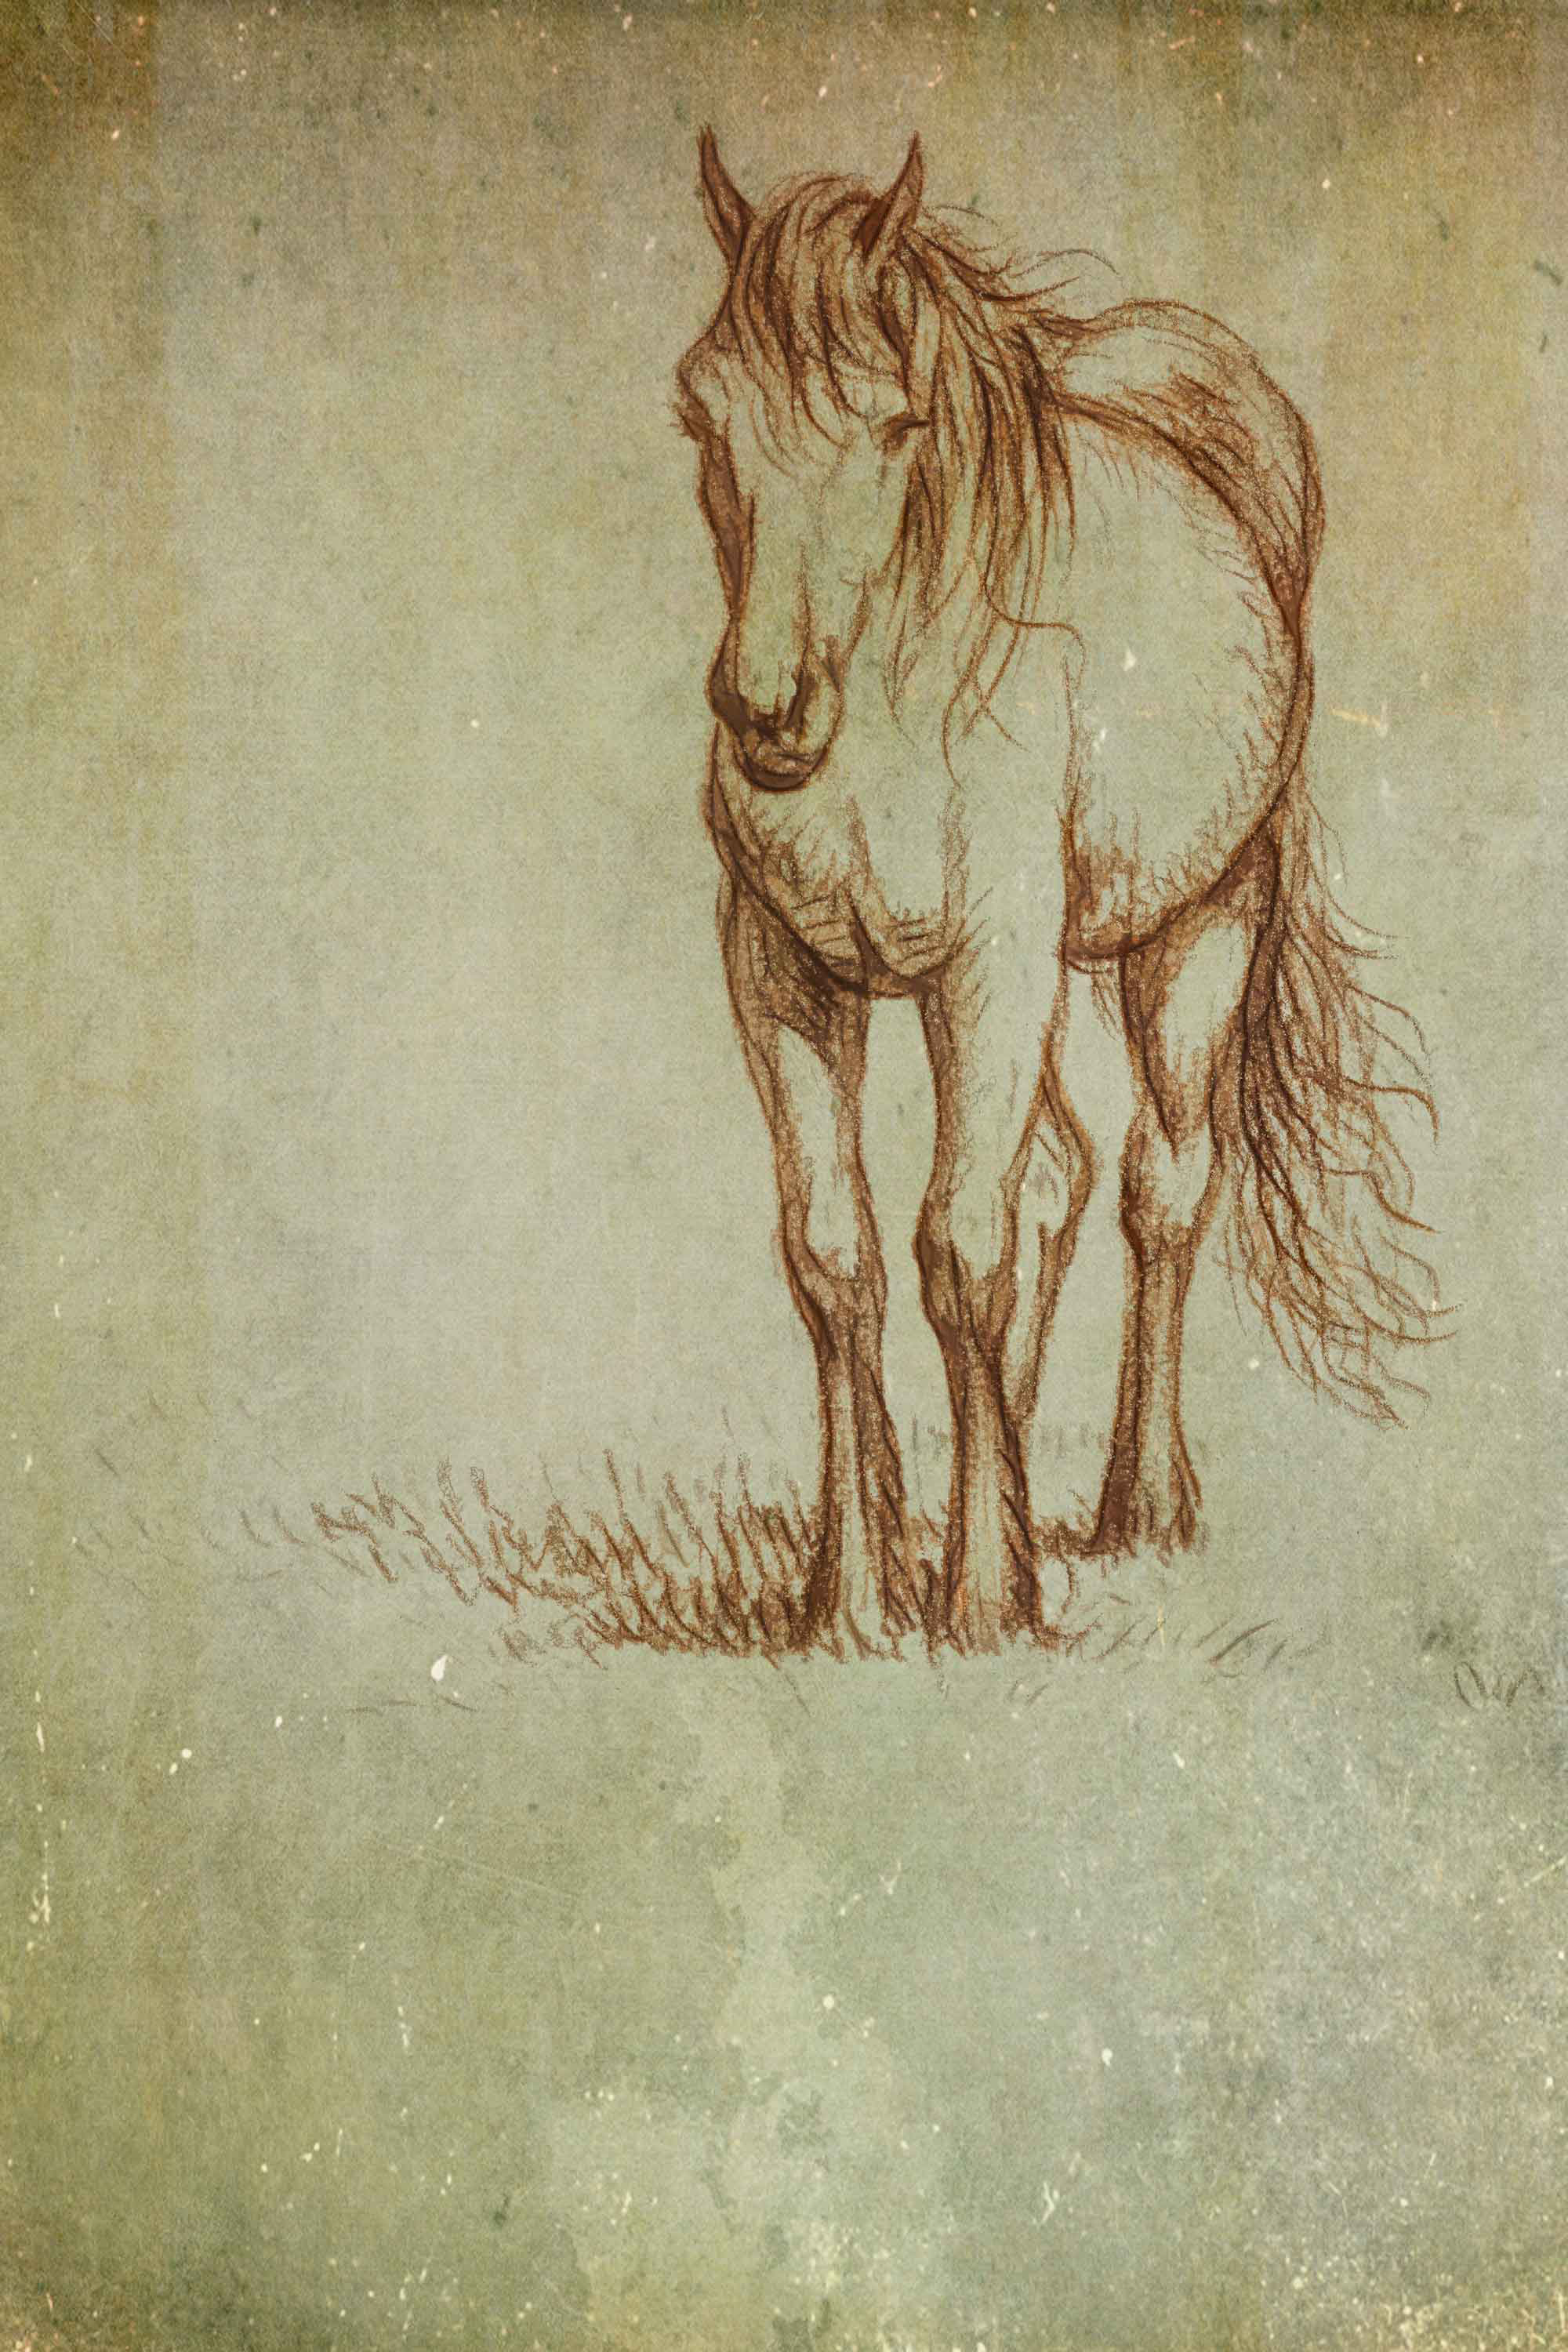 15 Horse Drawings For Kids, Teach You How To Draw A Horse? - DIY ART PINS